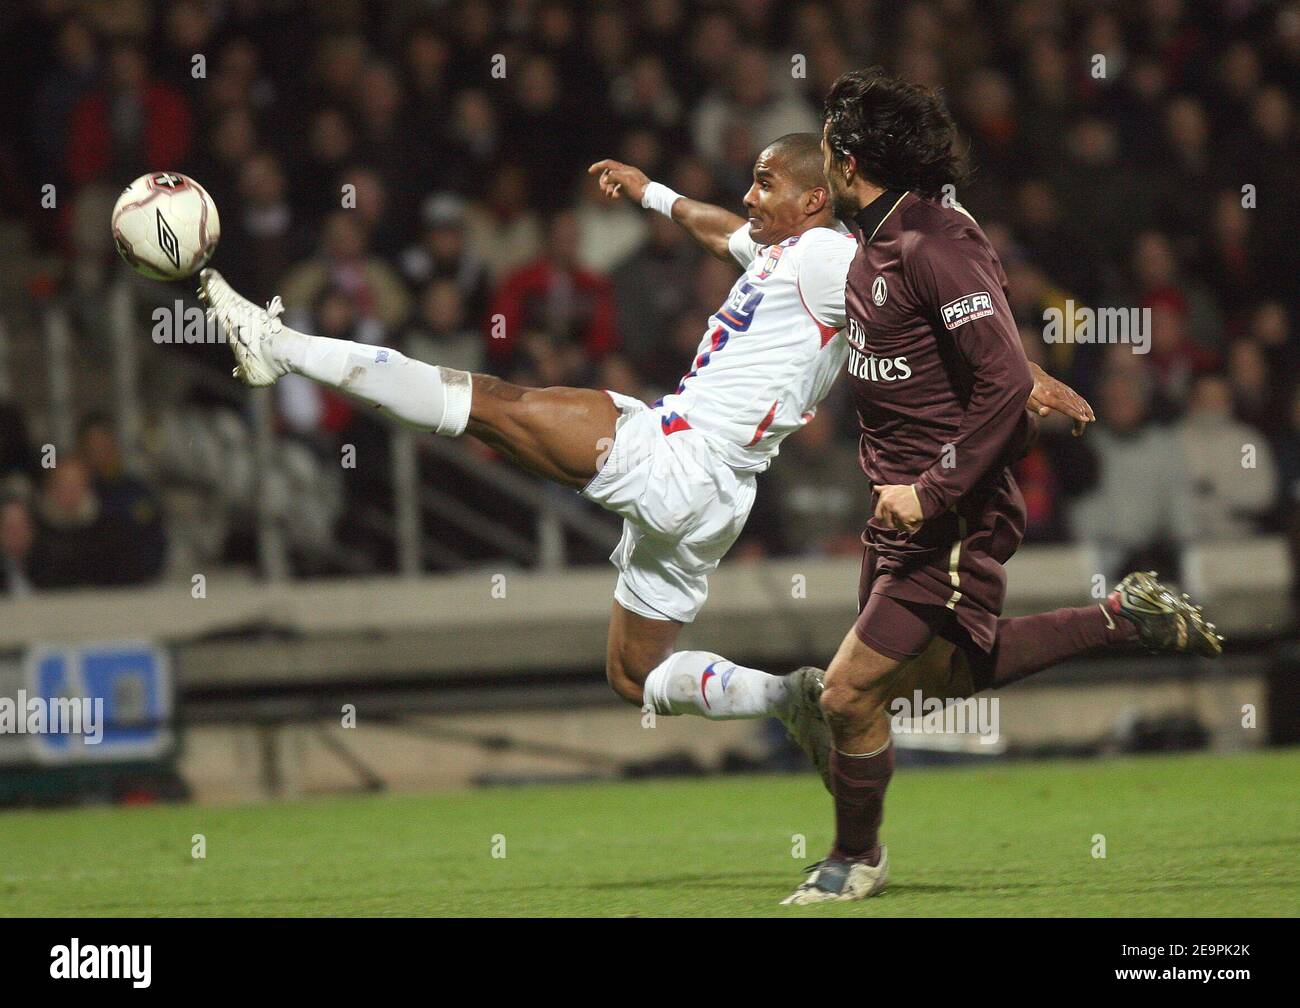 Lyon's Florent Malouda and PSG's Mario Yepes during the match the French first league football match Olympique Lyonnais vs Paris Saint-Germain at the Gerland stadium in Lyon, France on December 10, 2006. OL won 3-1. Photo by Mehdi Taamallah/Cameleon/ABACAPRESS.COM Stock Photo